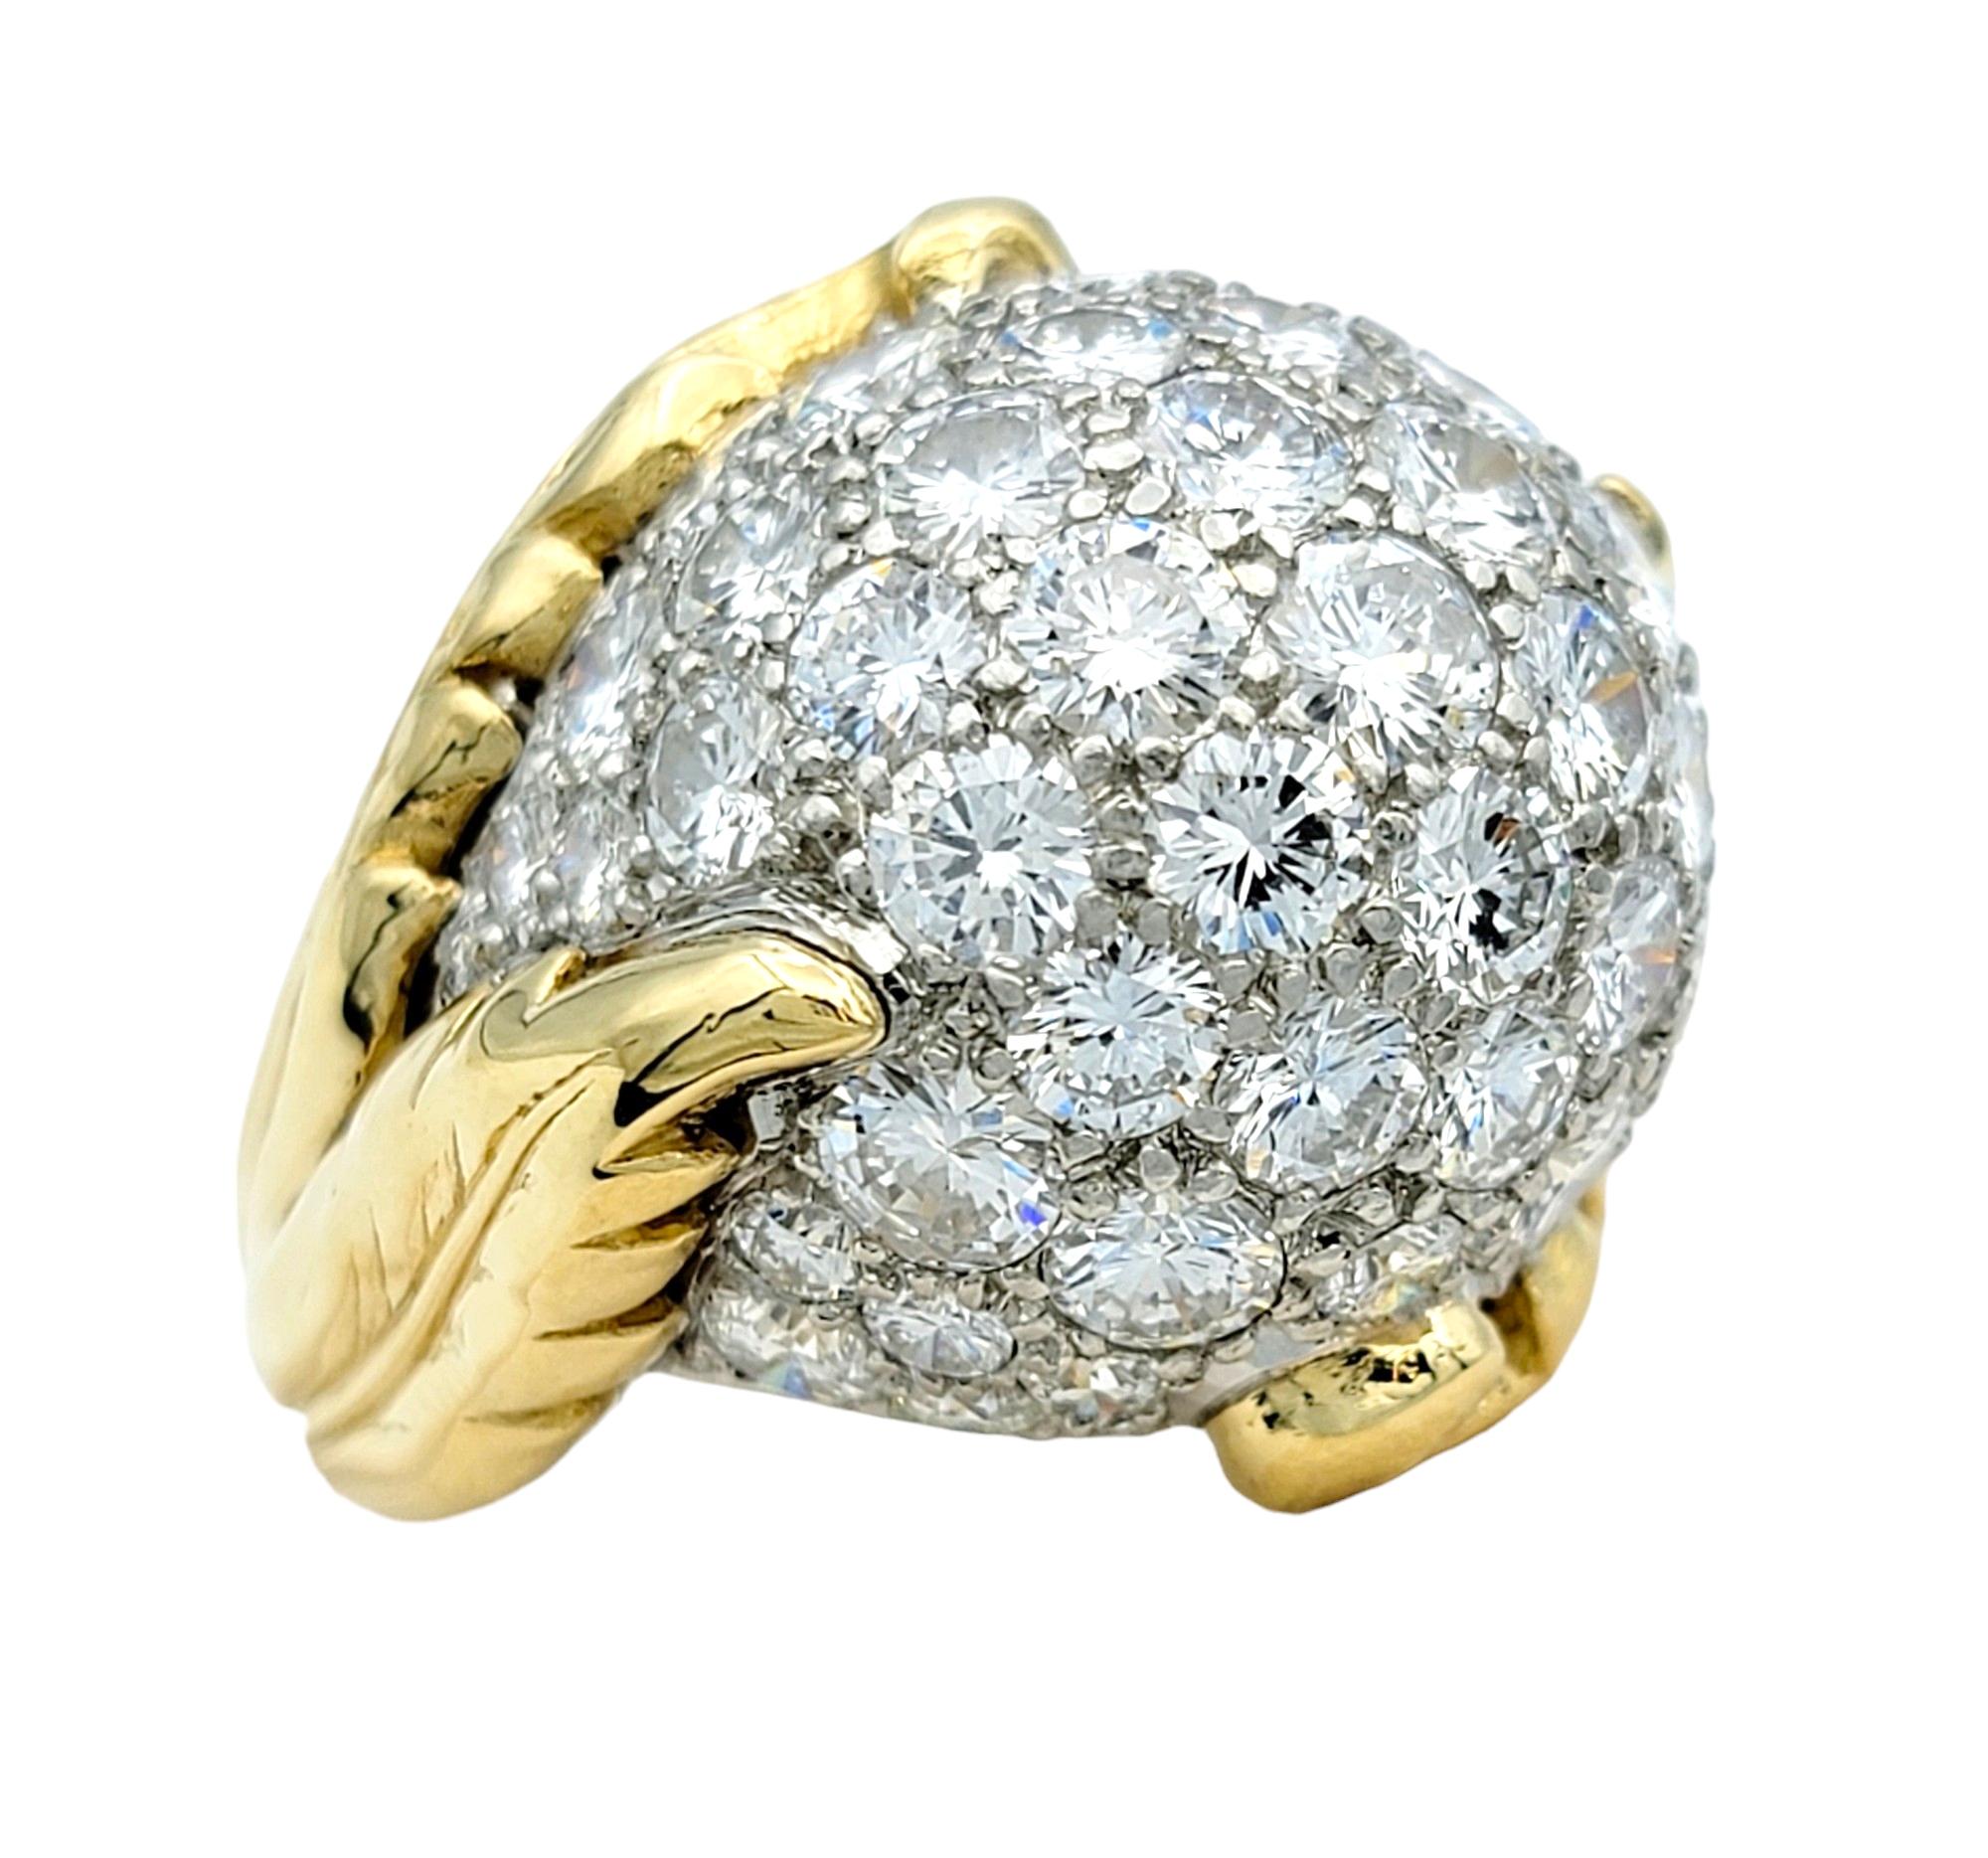 Contemporary 4.00 Carat Total Diamond Domed Cocktail Ring with Leaf Motif in 18 Karat Gold For Sale